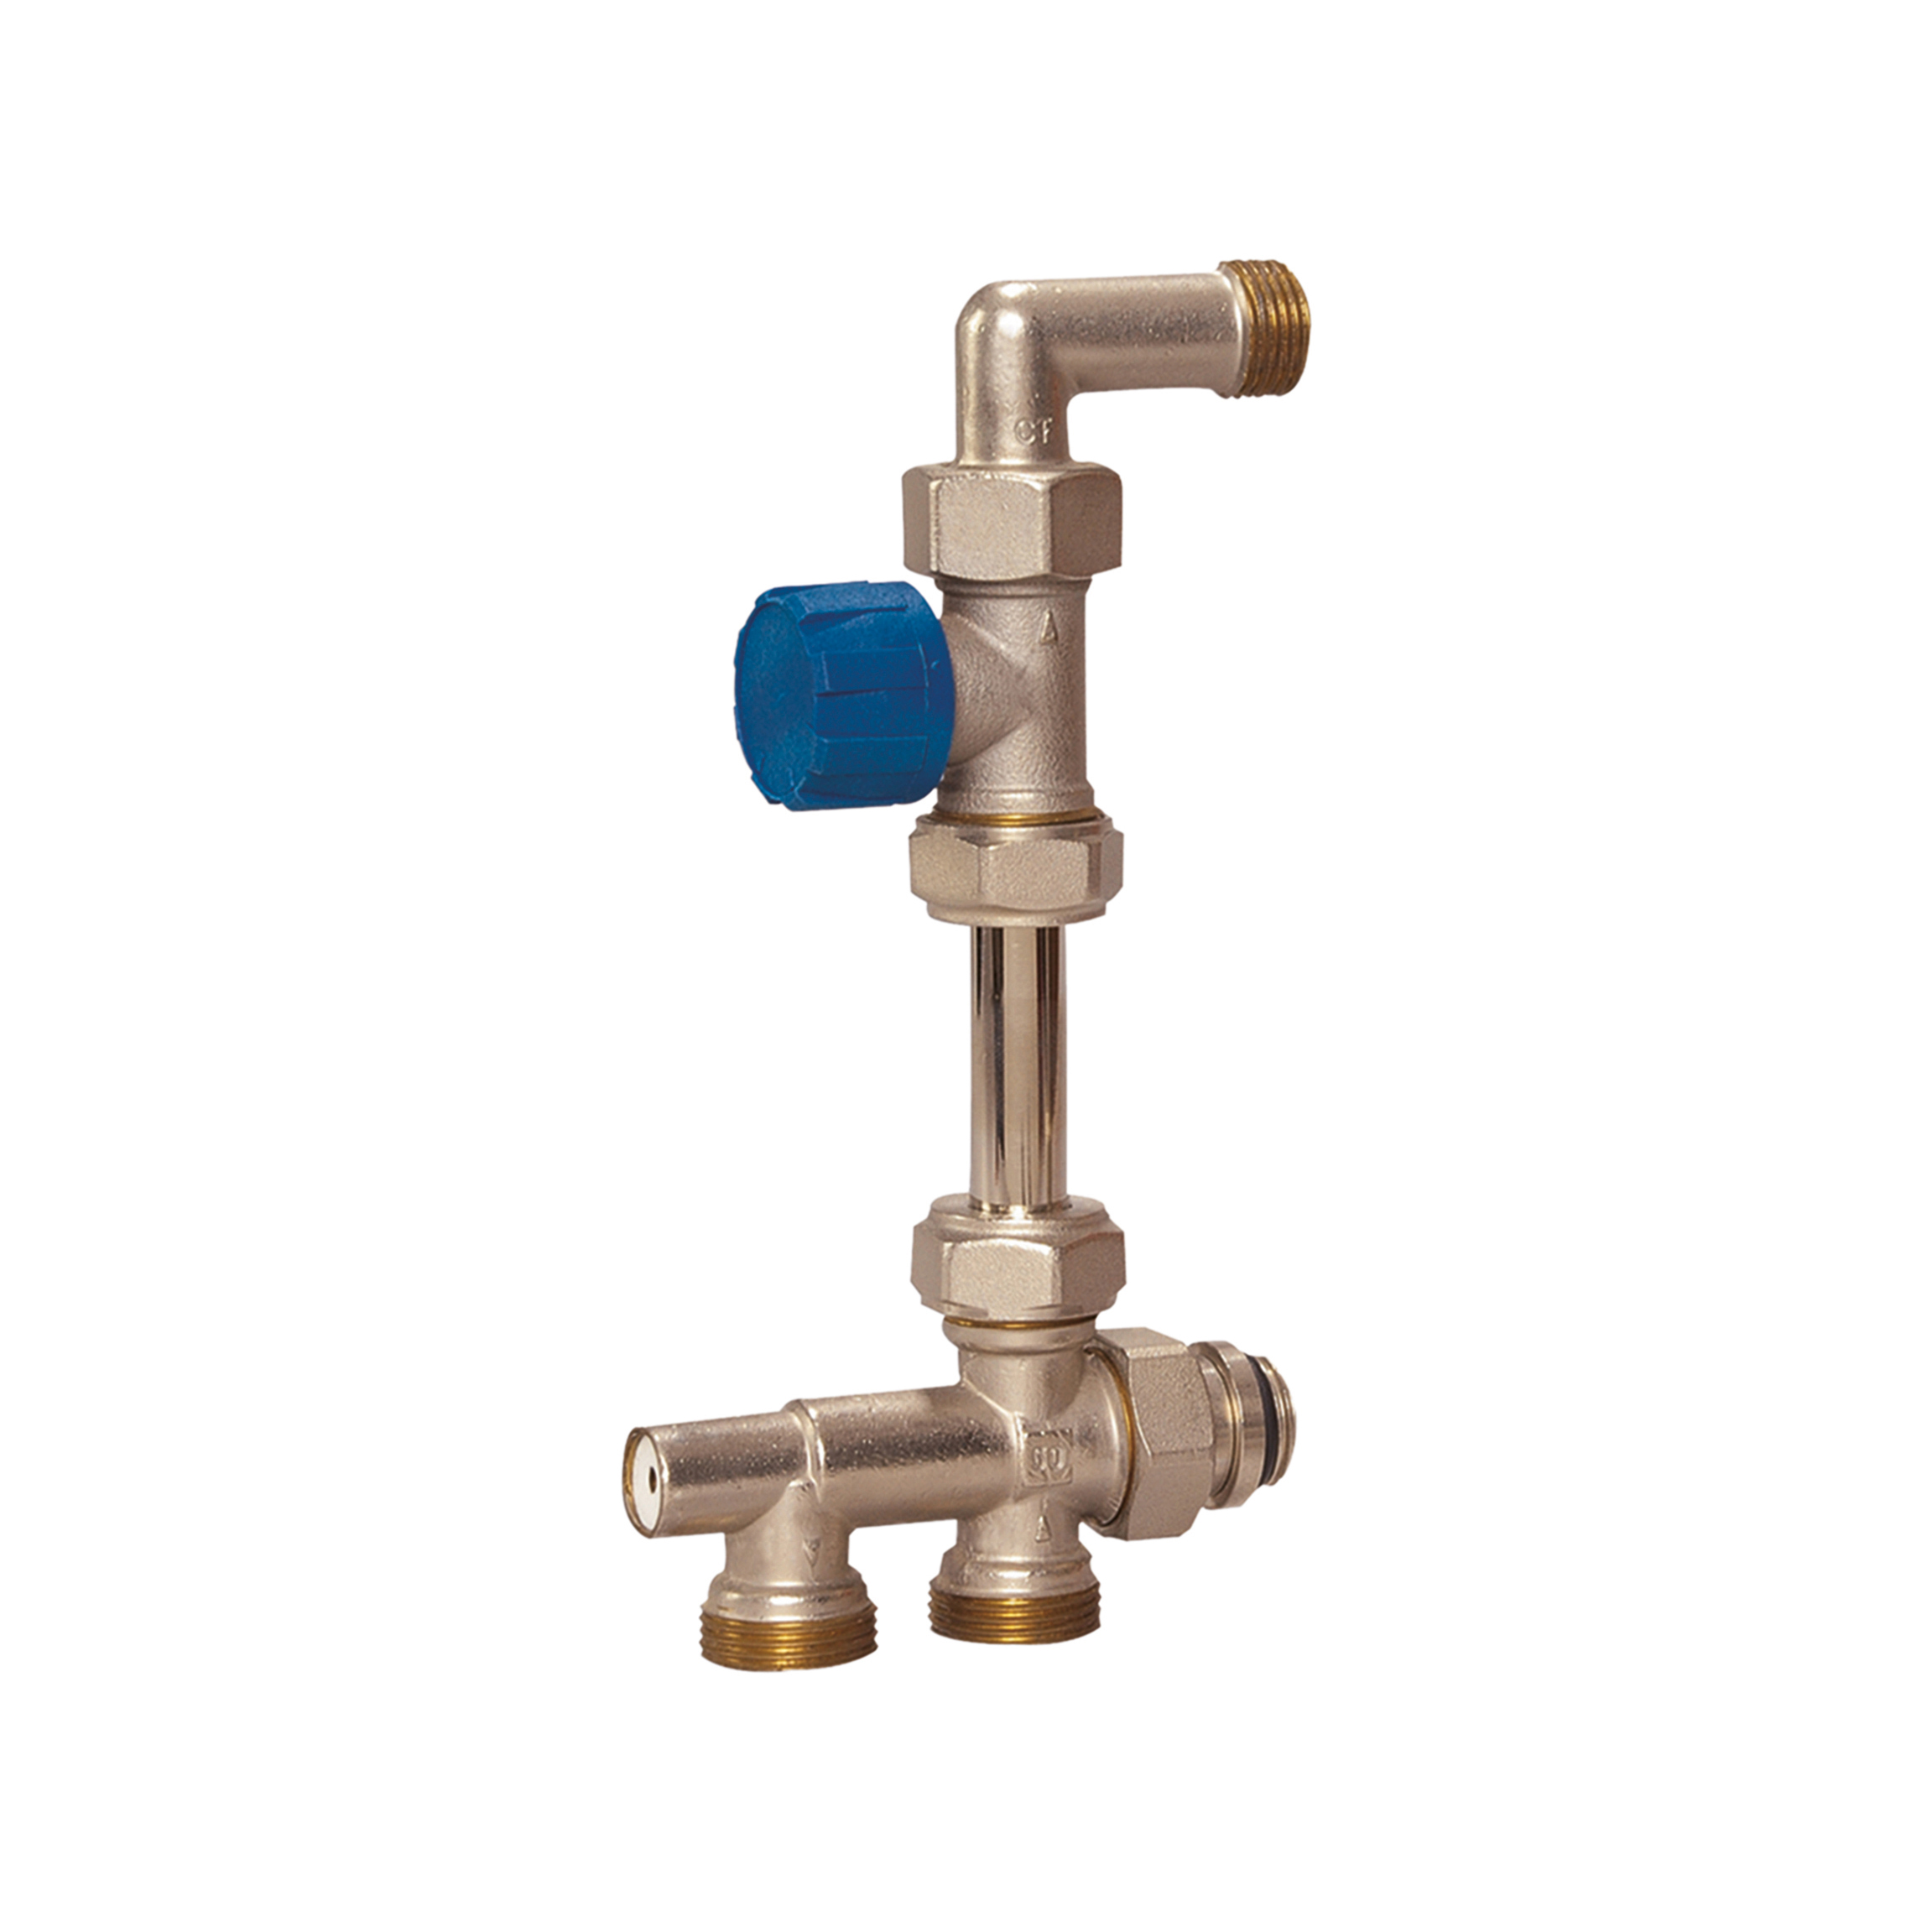 Mono-tube connection set with straight-way valve